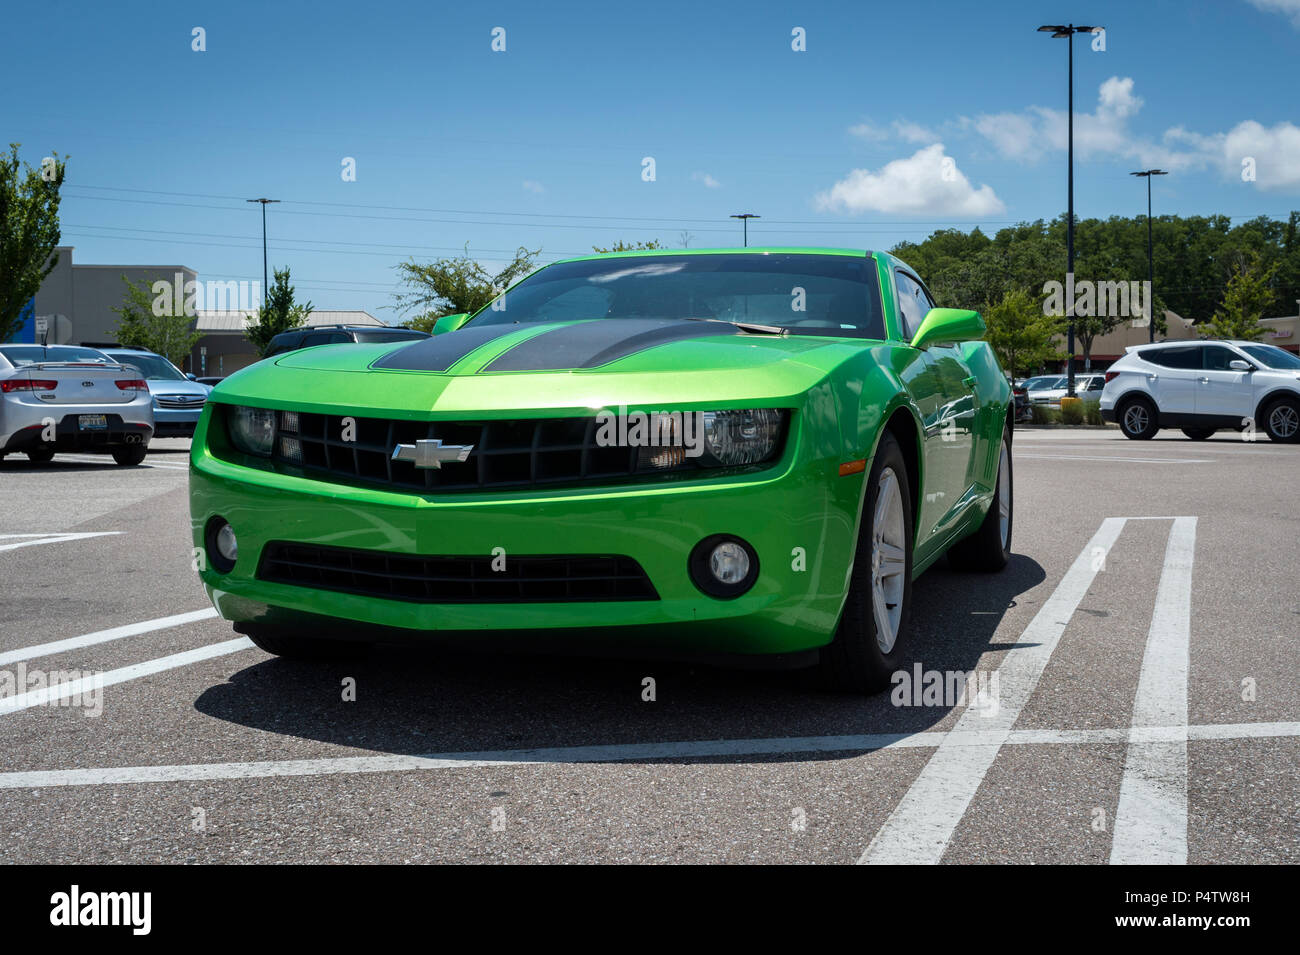 Chevrolet Camaro in green, american muscle car Stock Photo